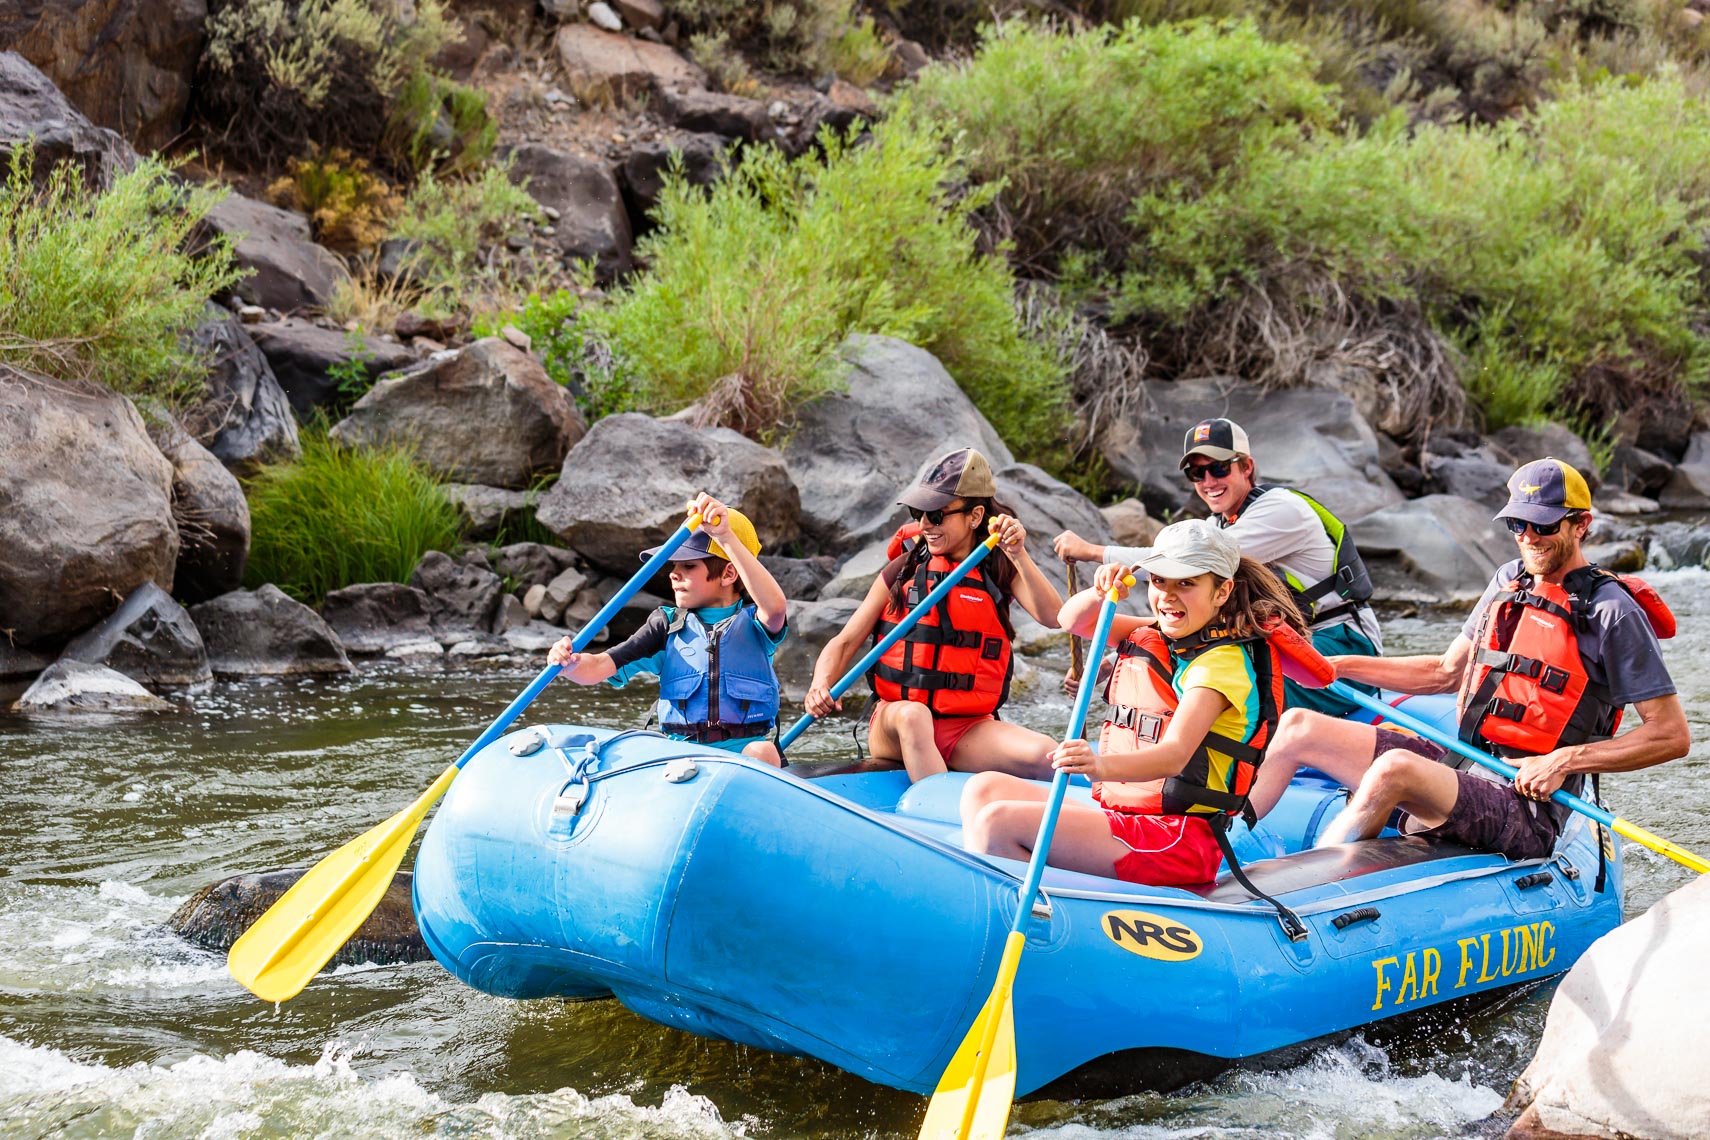 Whitewater Rafting Vacation Taos | Michael DeYoung Photographer